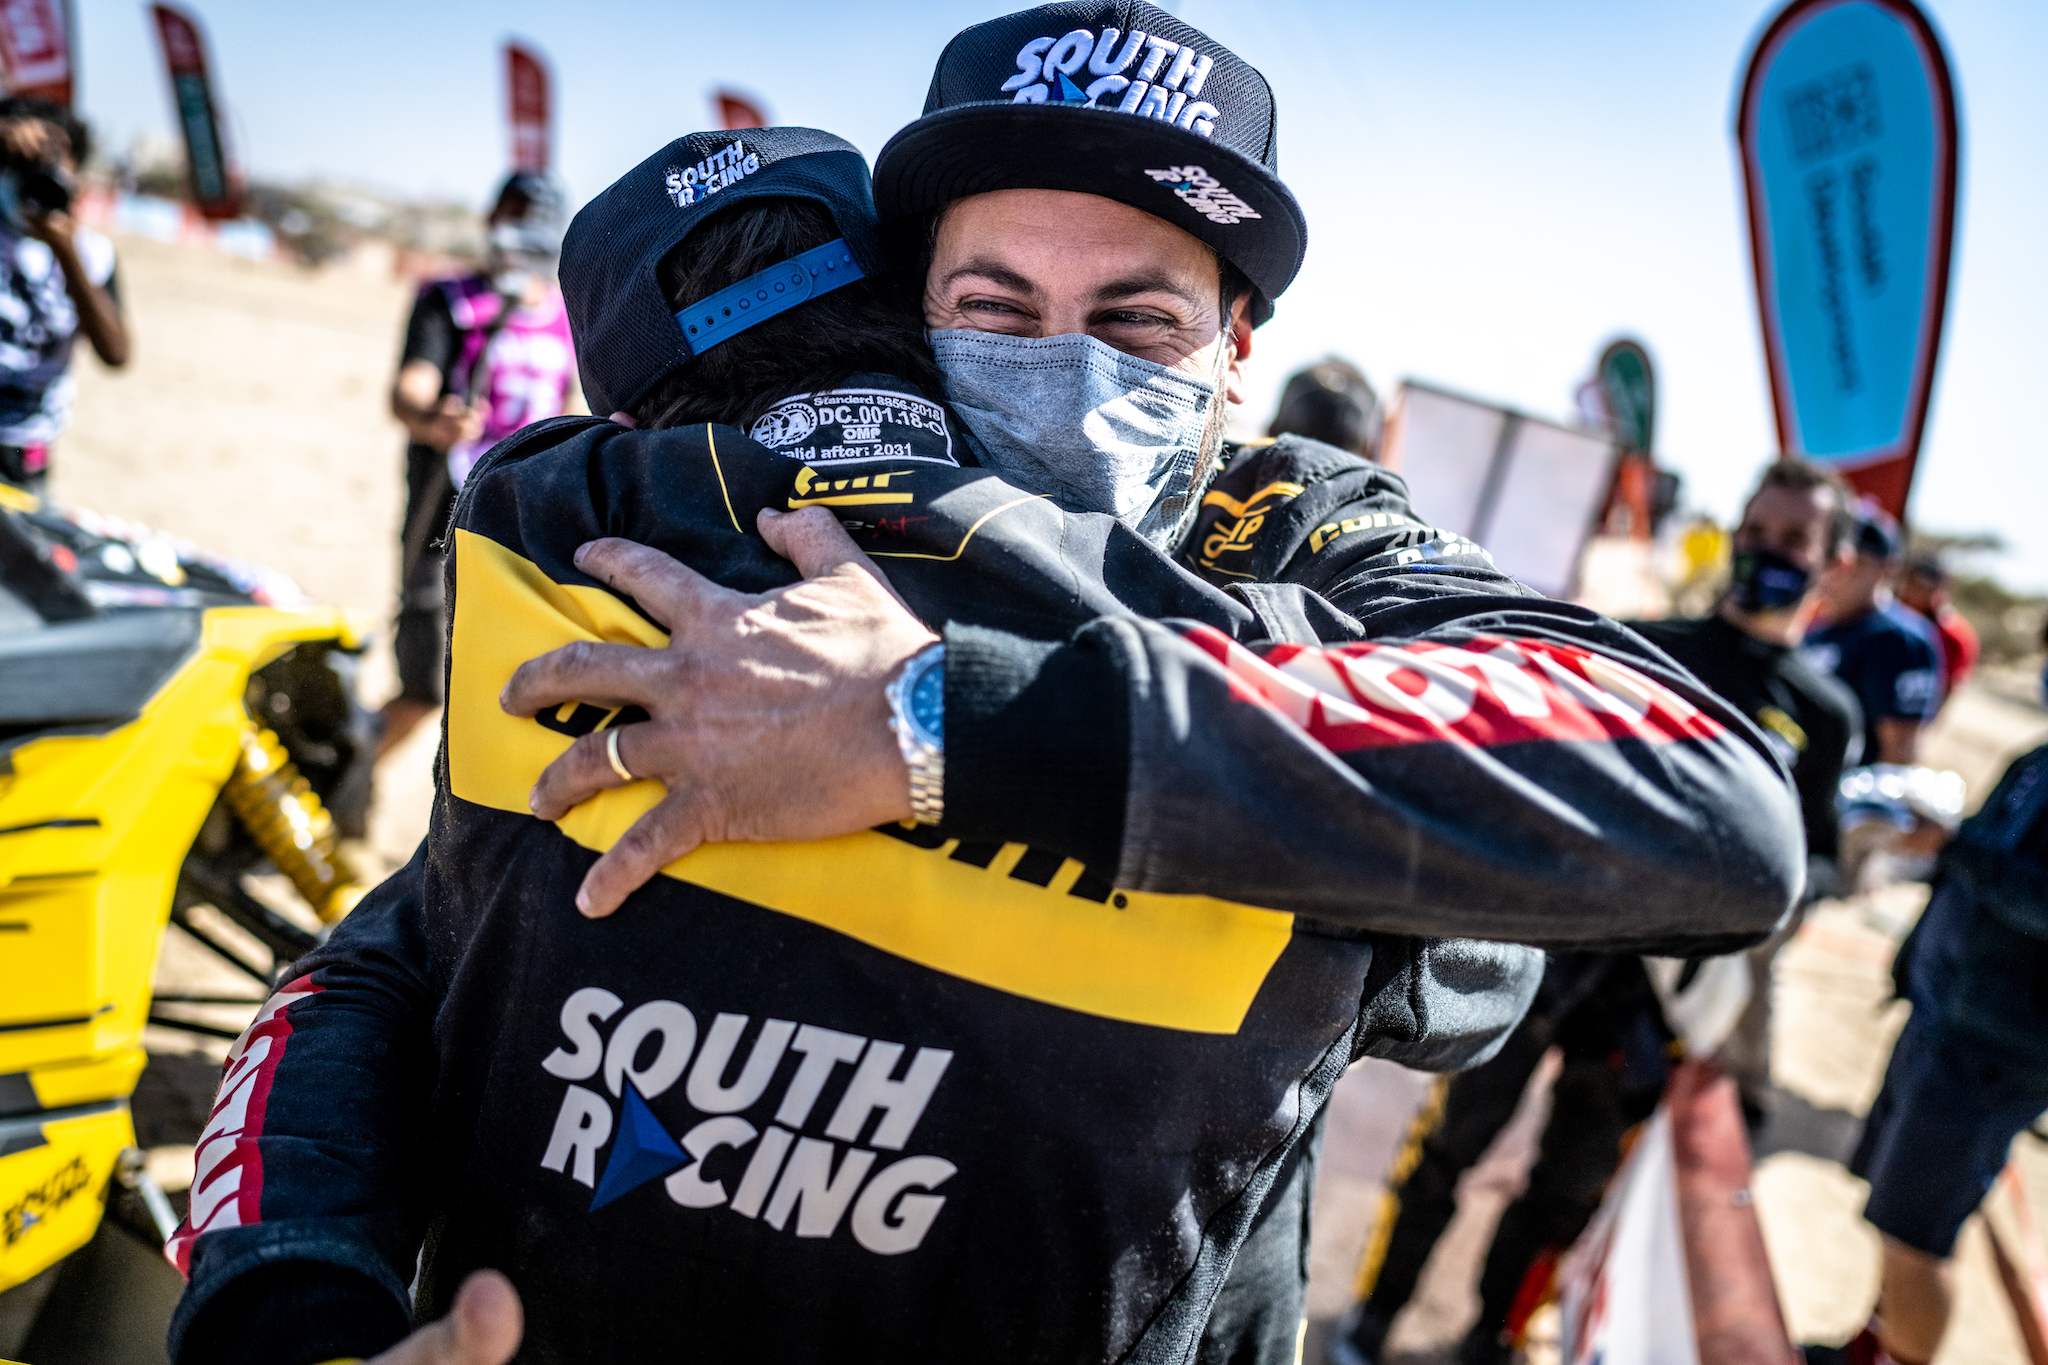 CAN-AM MAVERICK X3 TAKES HOME THE DAKAR RALLY CHAMPIONSHIP FOR THE 5TH CONSECUTIVE YEAR!